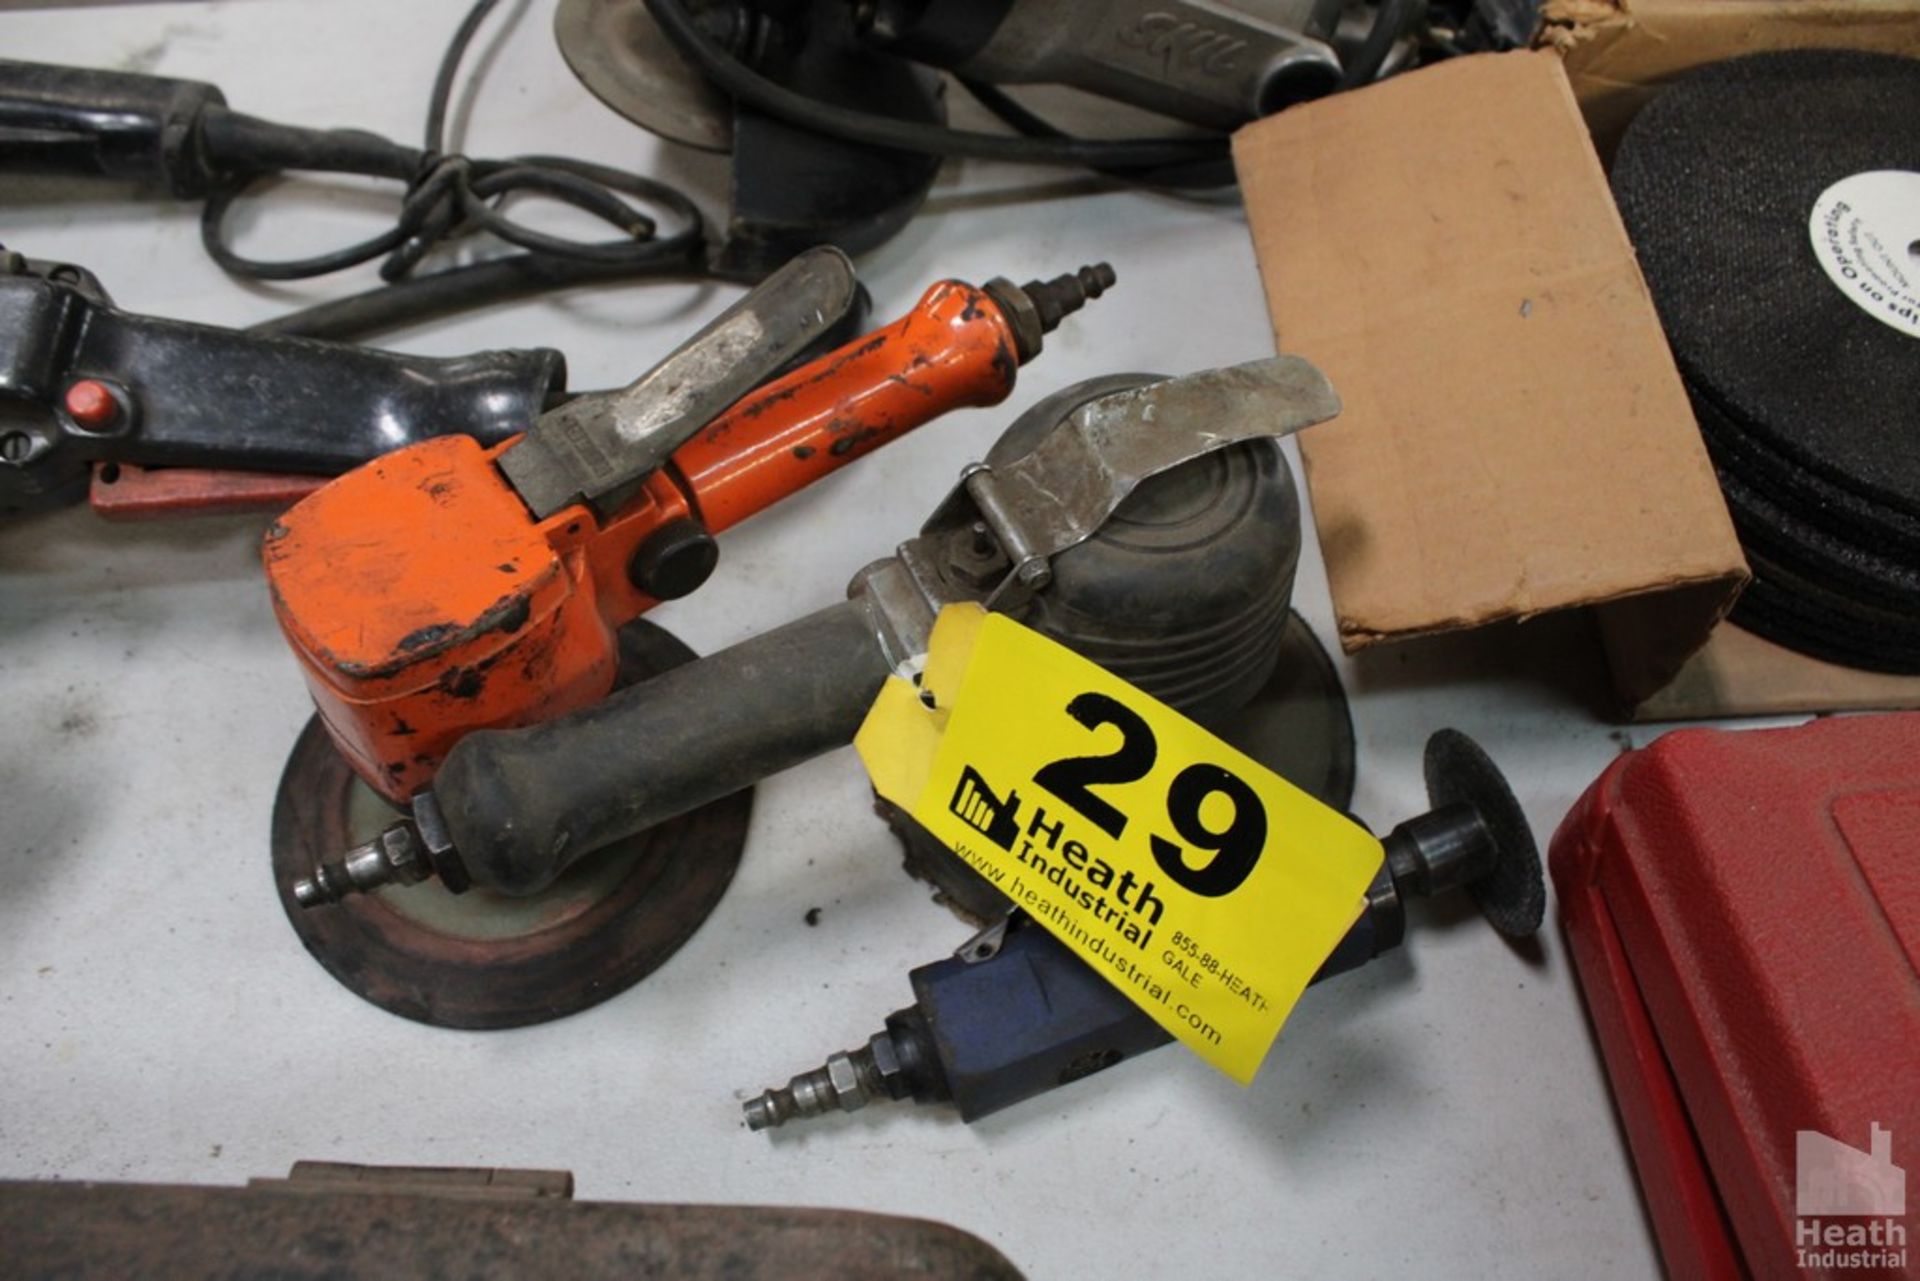 (3) ASSORTED PNEUMATIC TOOLS, (2) SANDERS AND (1) CUTOFF